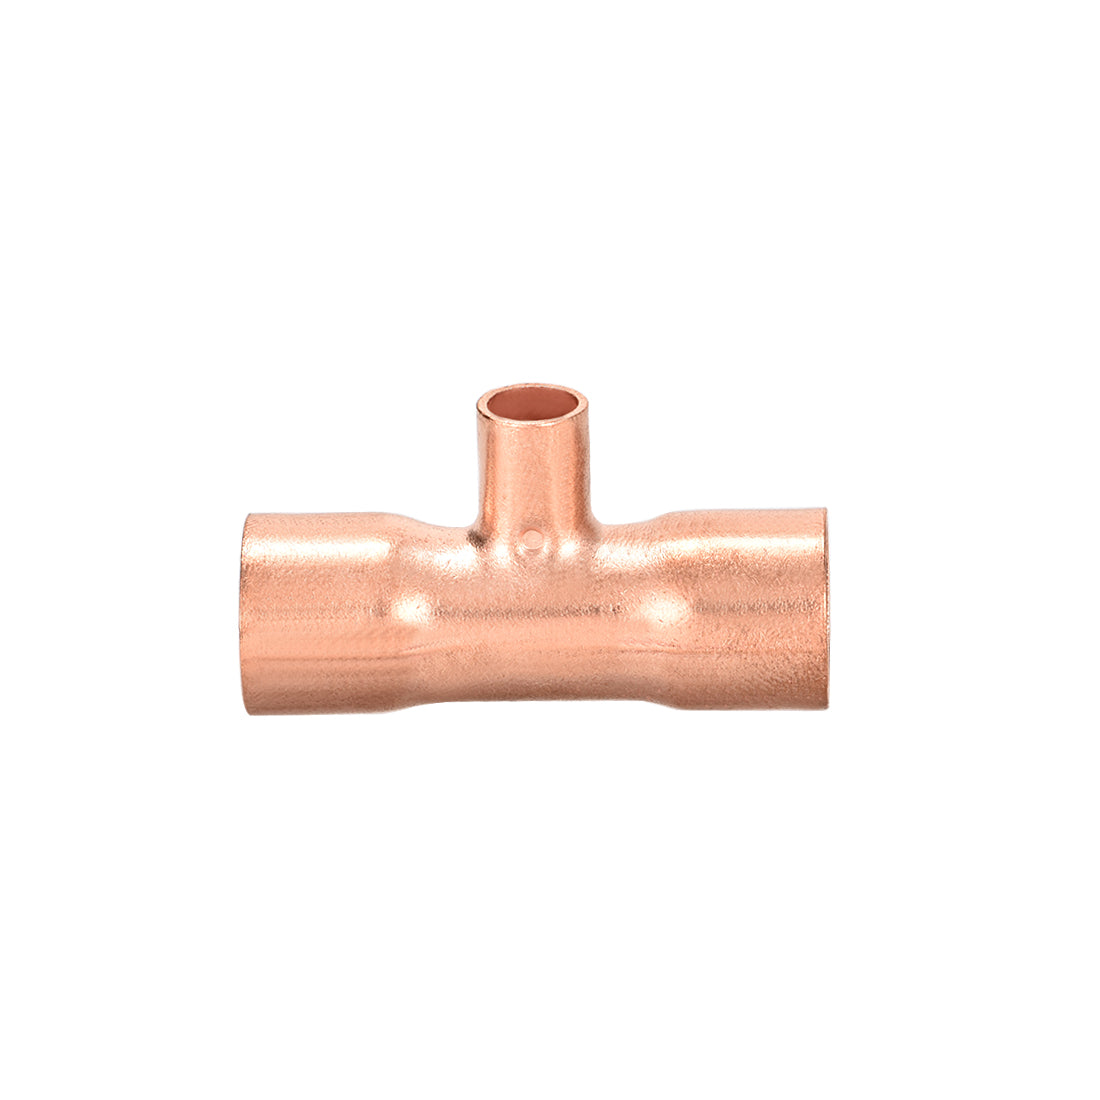 uxcell Uxcell 1/2-inch x 1/4-inch x 1/2-inch Copper Reducing Tee Copper Pressure Pipe Fitting Conector  for Plumbing Supply and Refrigeration 2pcs